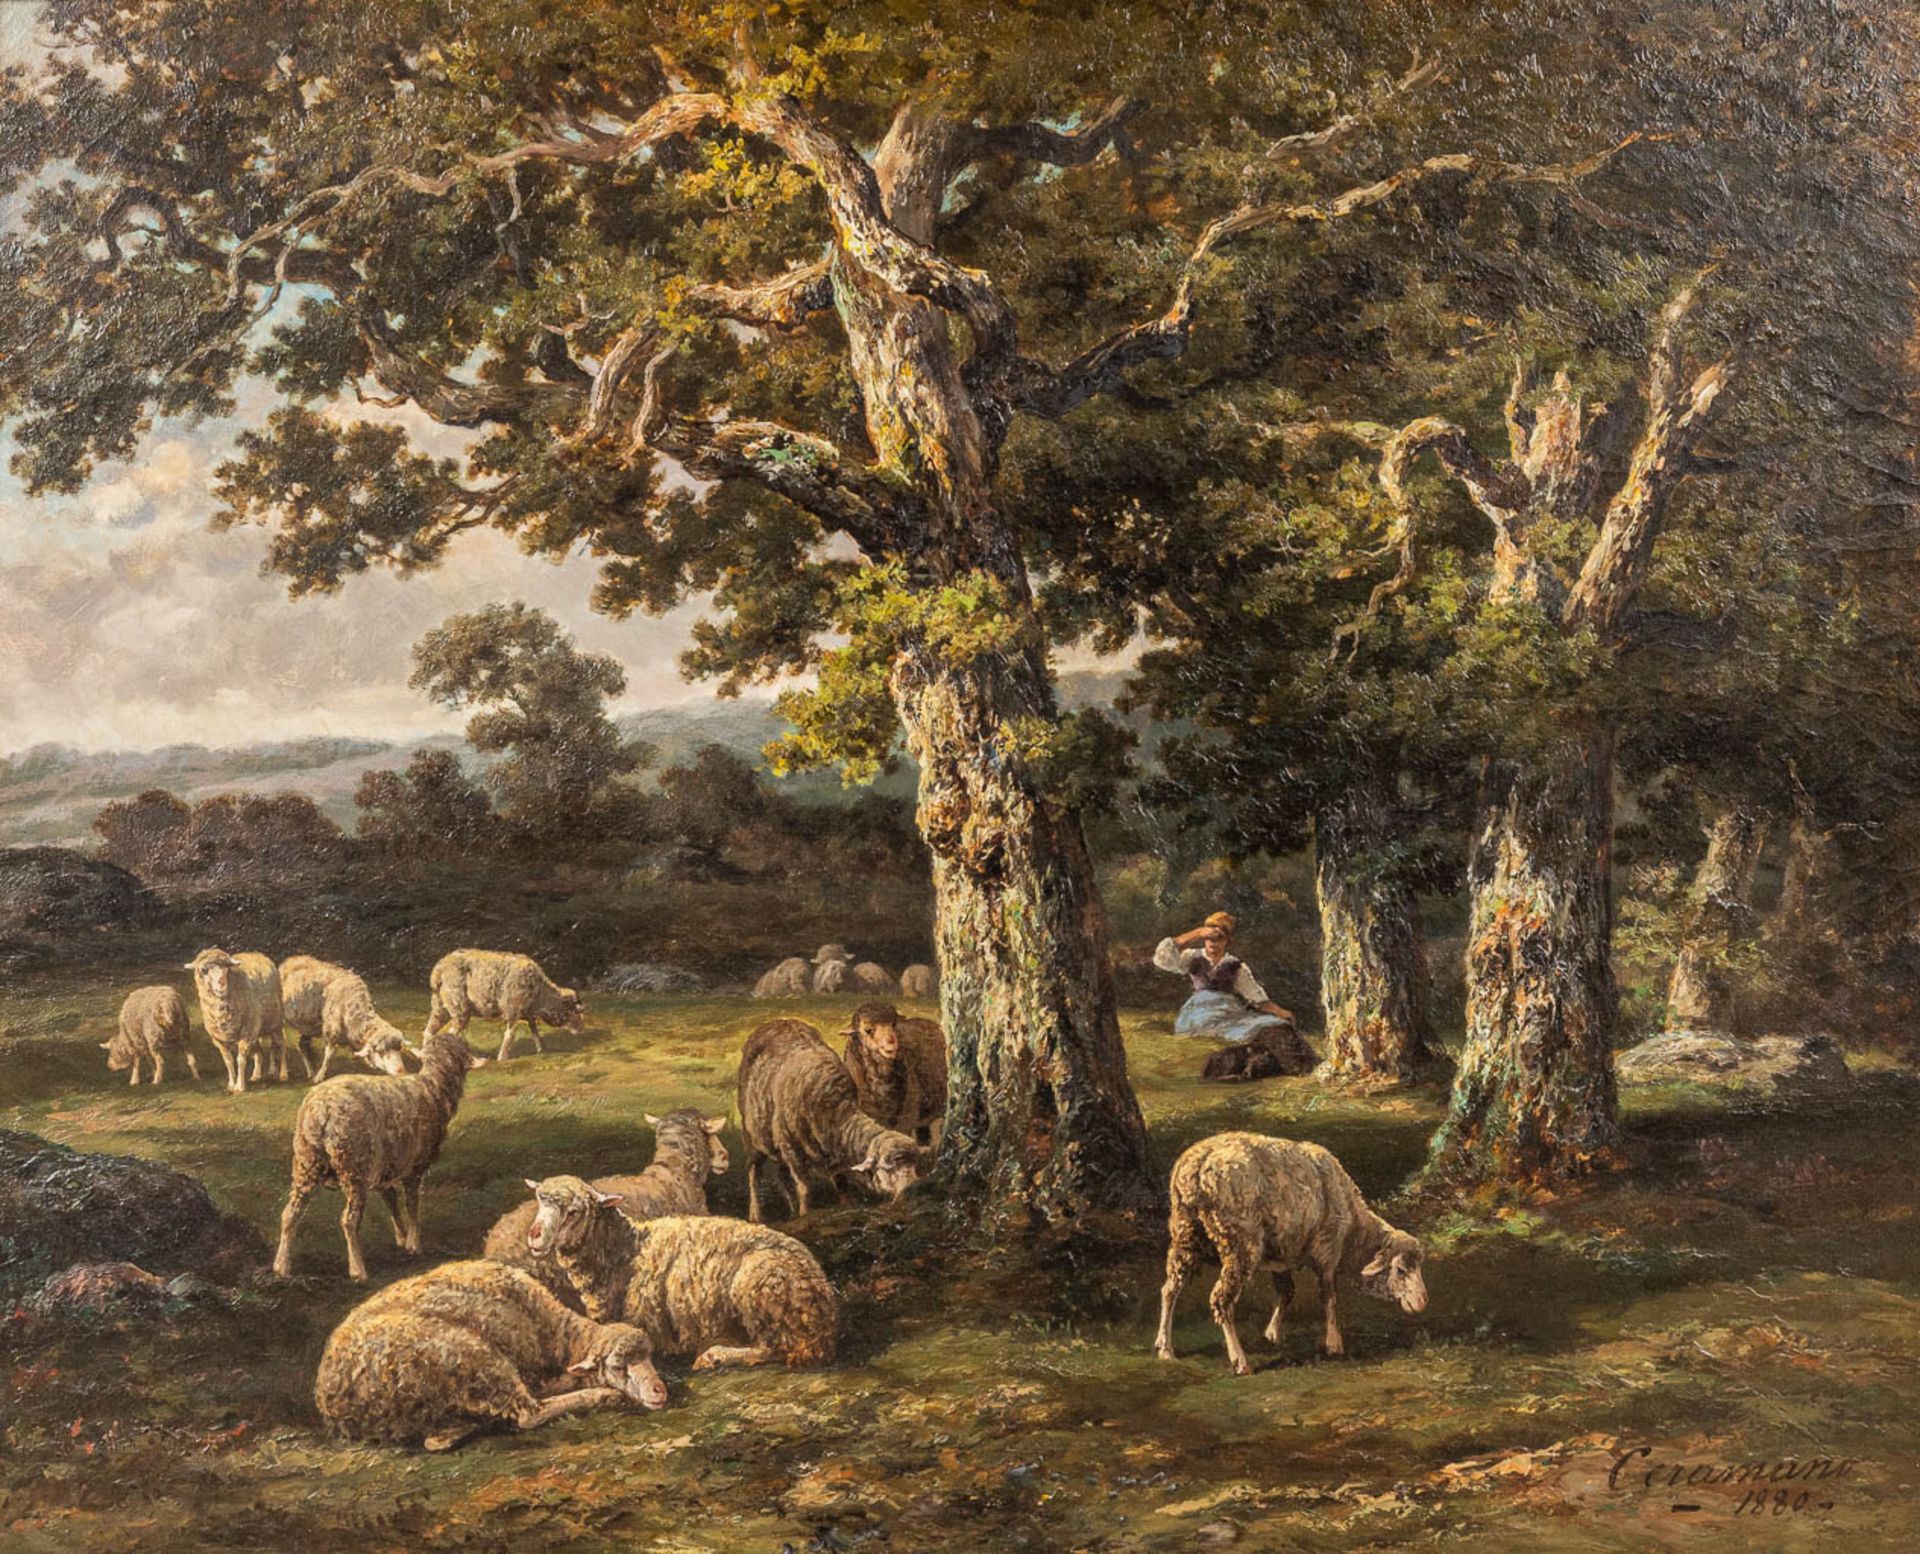 Charles Ferdinand CERAMANO (1829/31-1909) 'Sheep in Barbison Forest' oil on canvas. 1880. (W: 81 x H